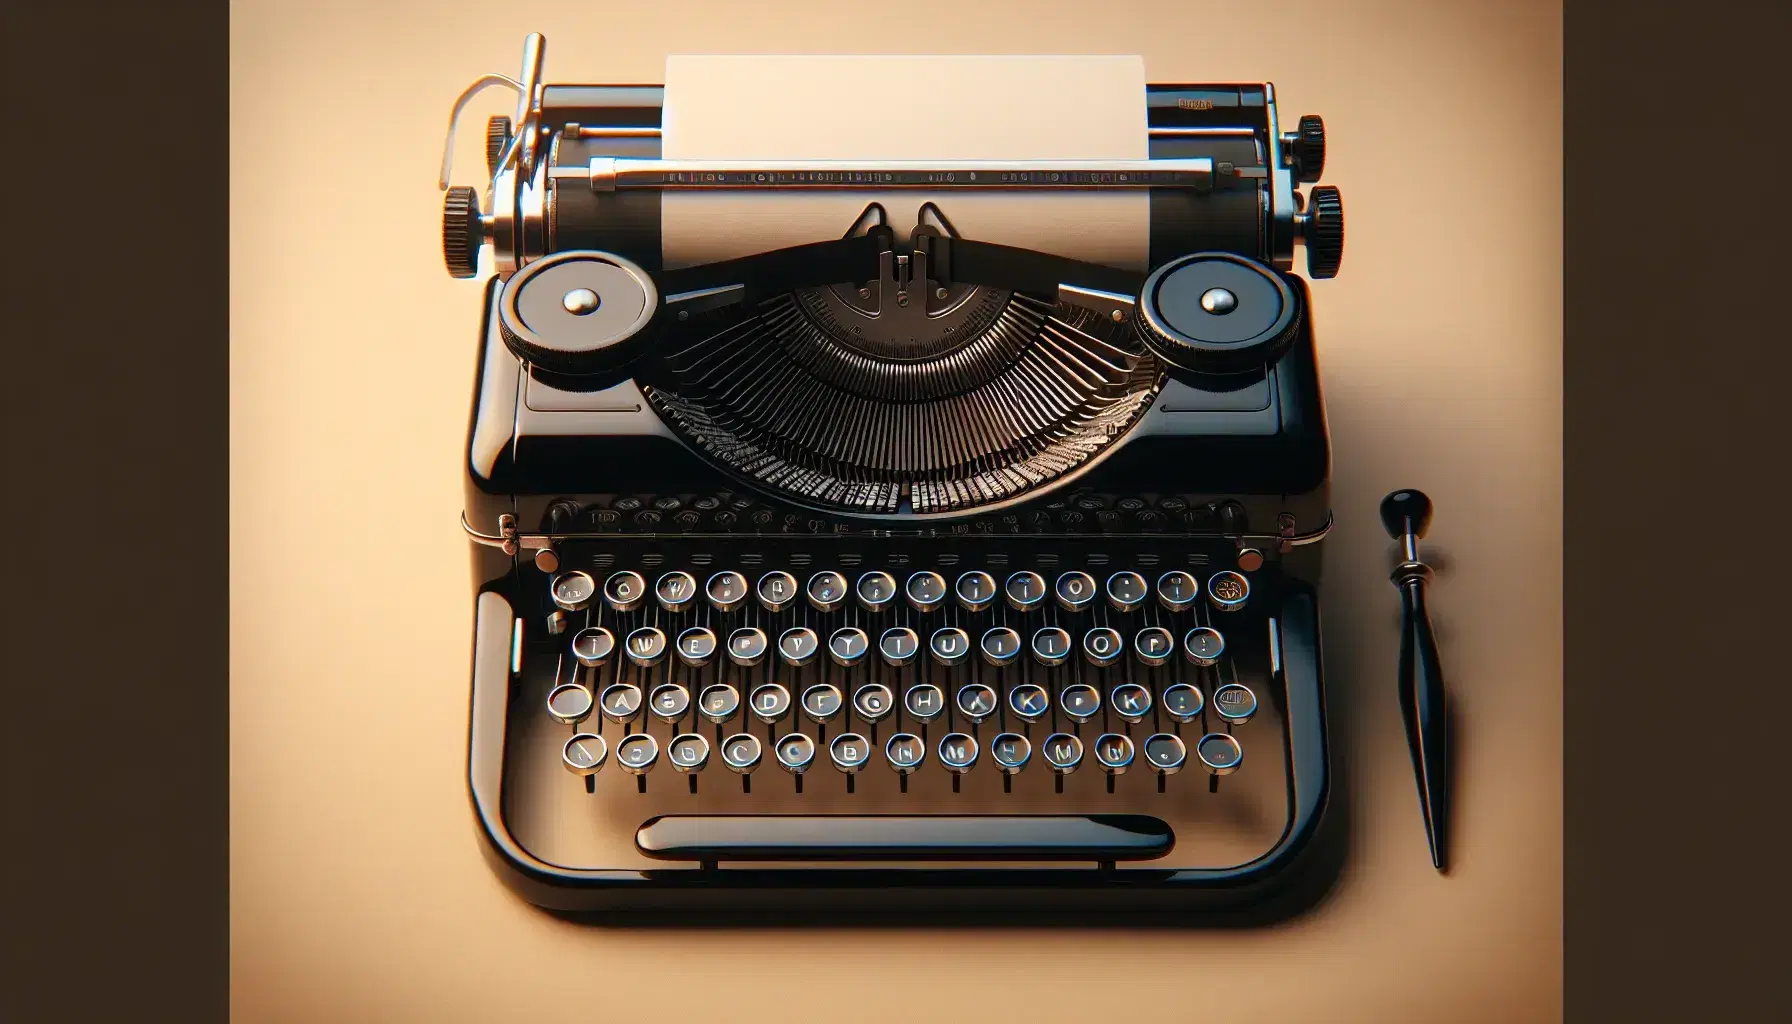 Close-up view of a vintage black typewriter with blank keys and a white sheet of paper, set against a cream background, reflecting soft light.